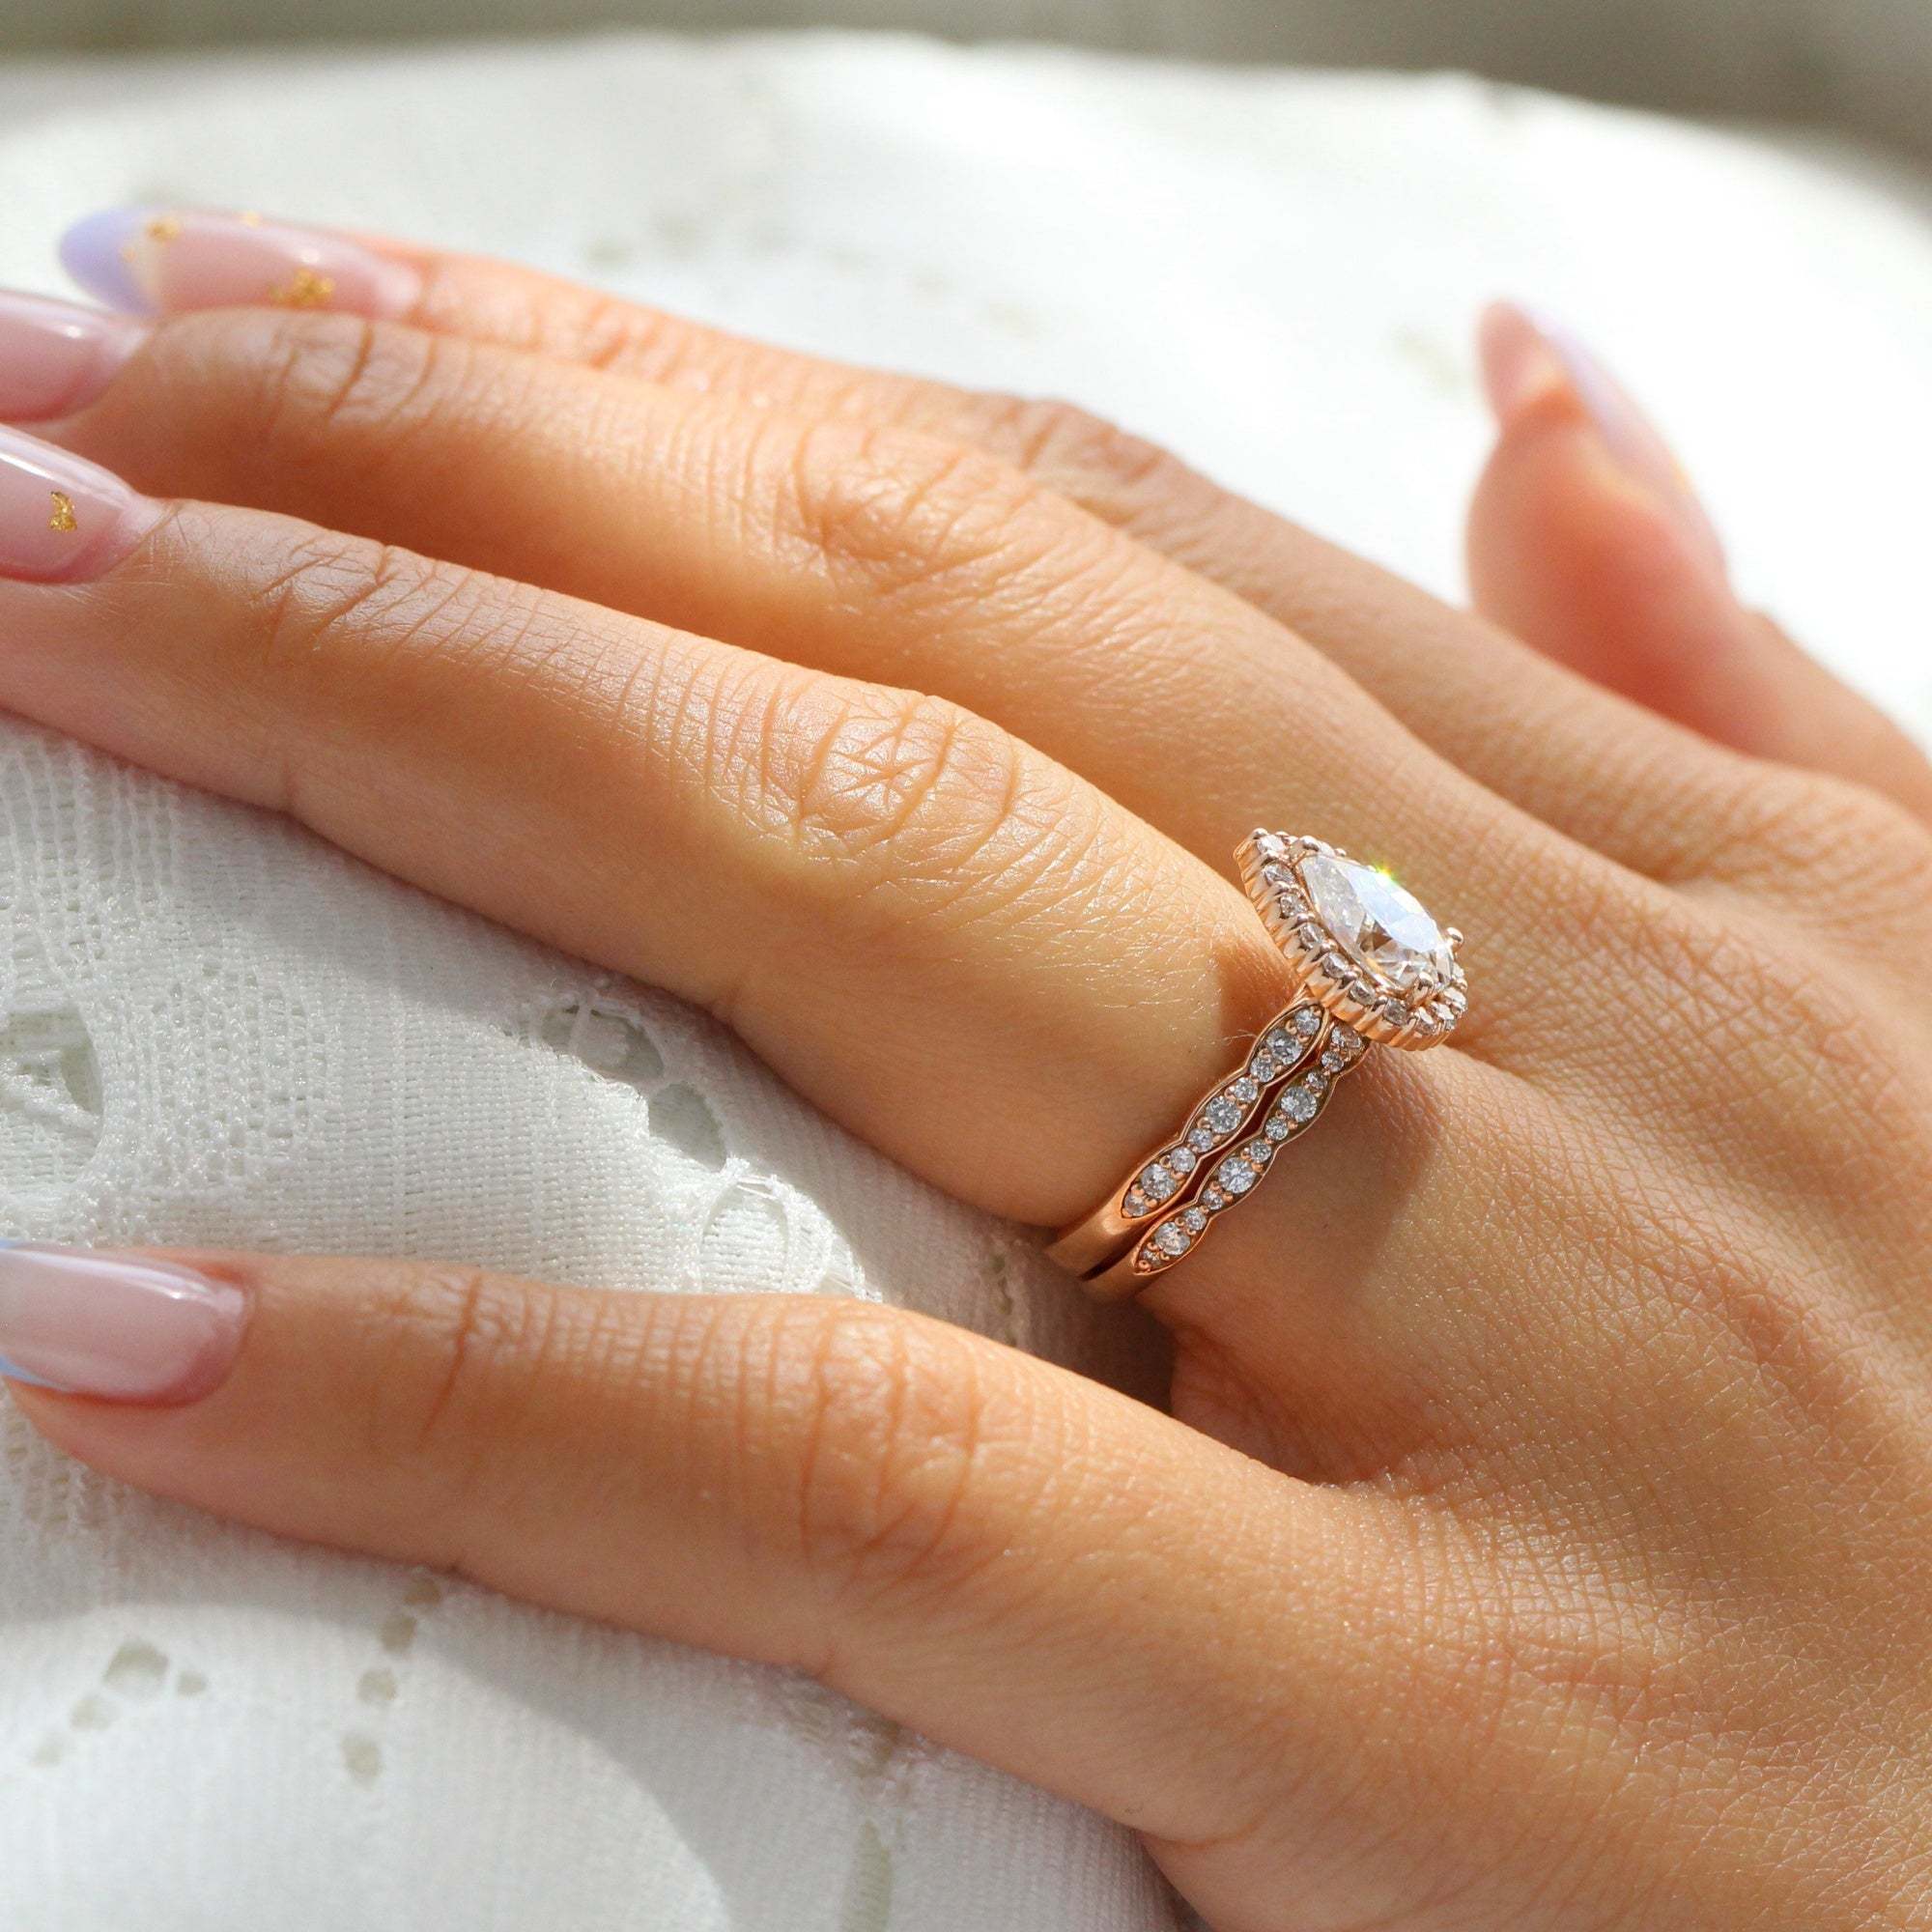 Halo diamond pear moissanite ring bridal set in rose gold scalloped band by la more design jewelry